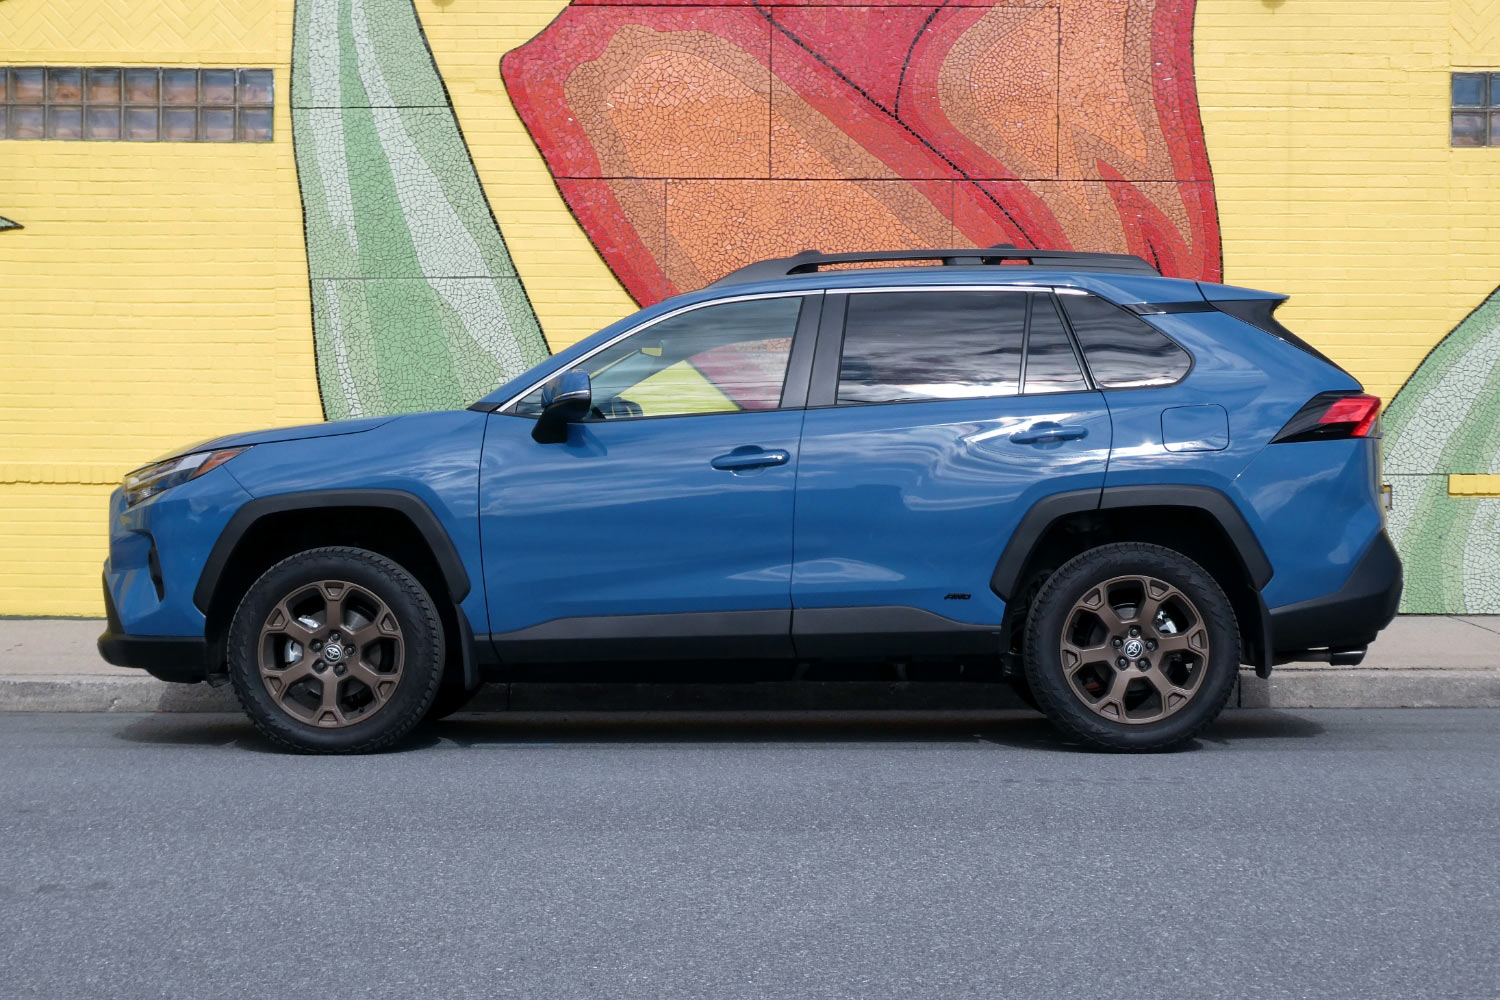 2023 Toyota RAV4 Hybrid Woodland Edition in Cavalry Blue by mural covered wall